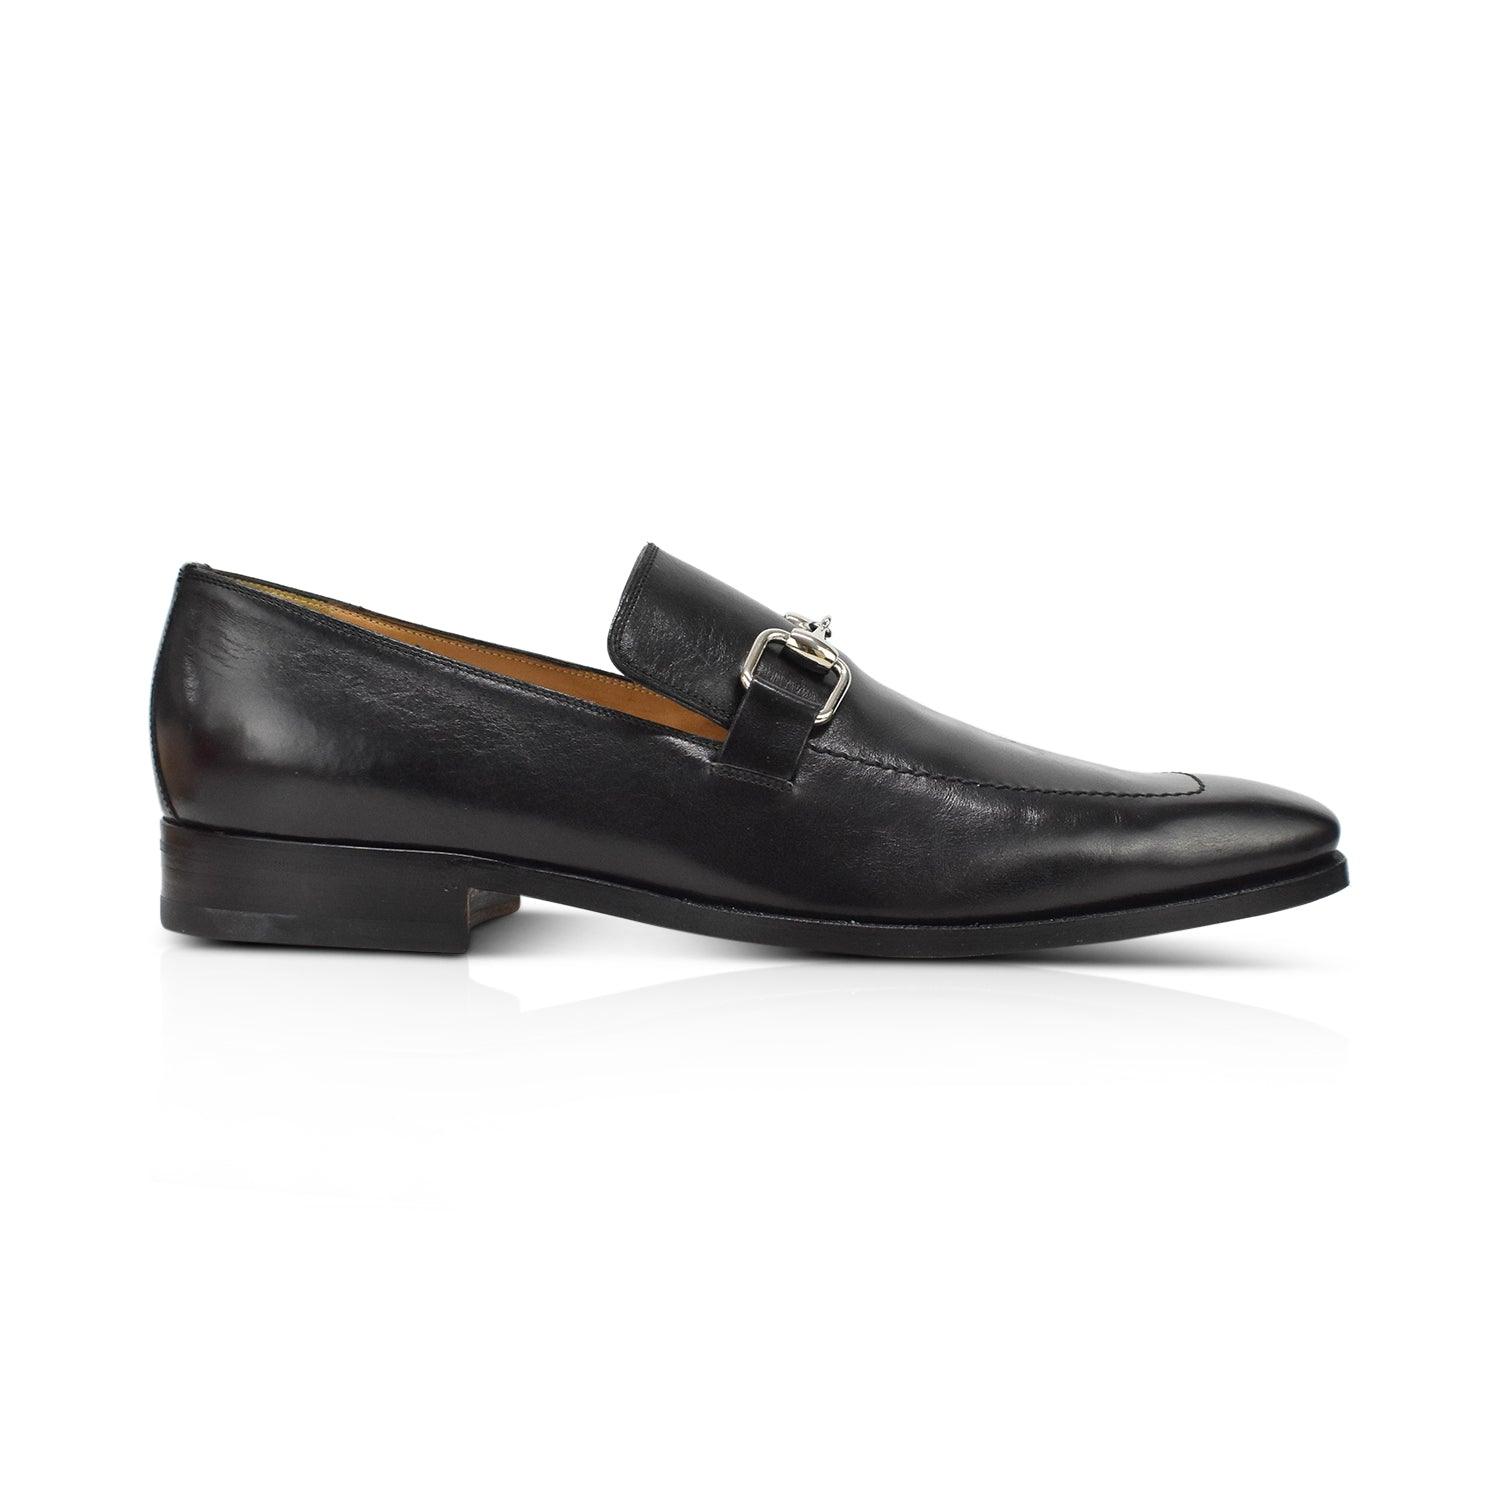 Gucci Dress Shoes - Men's 8.5 - Fashionably Yours